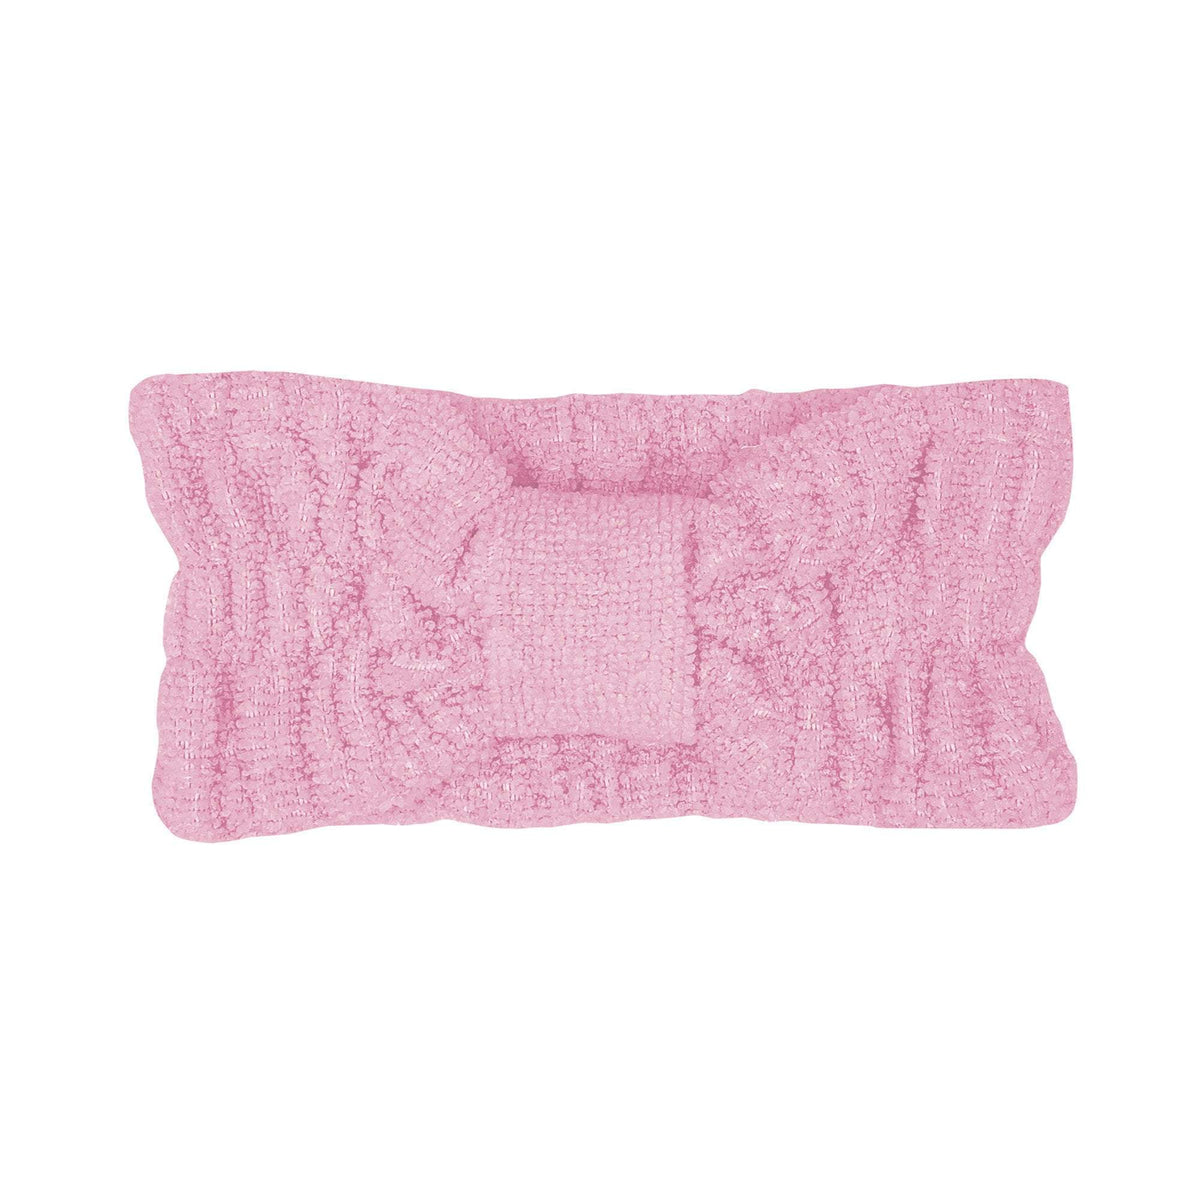 Daily Concepts Daily Beauty Headband, Pink